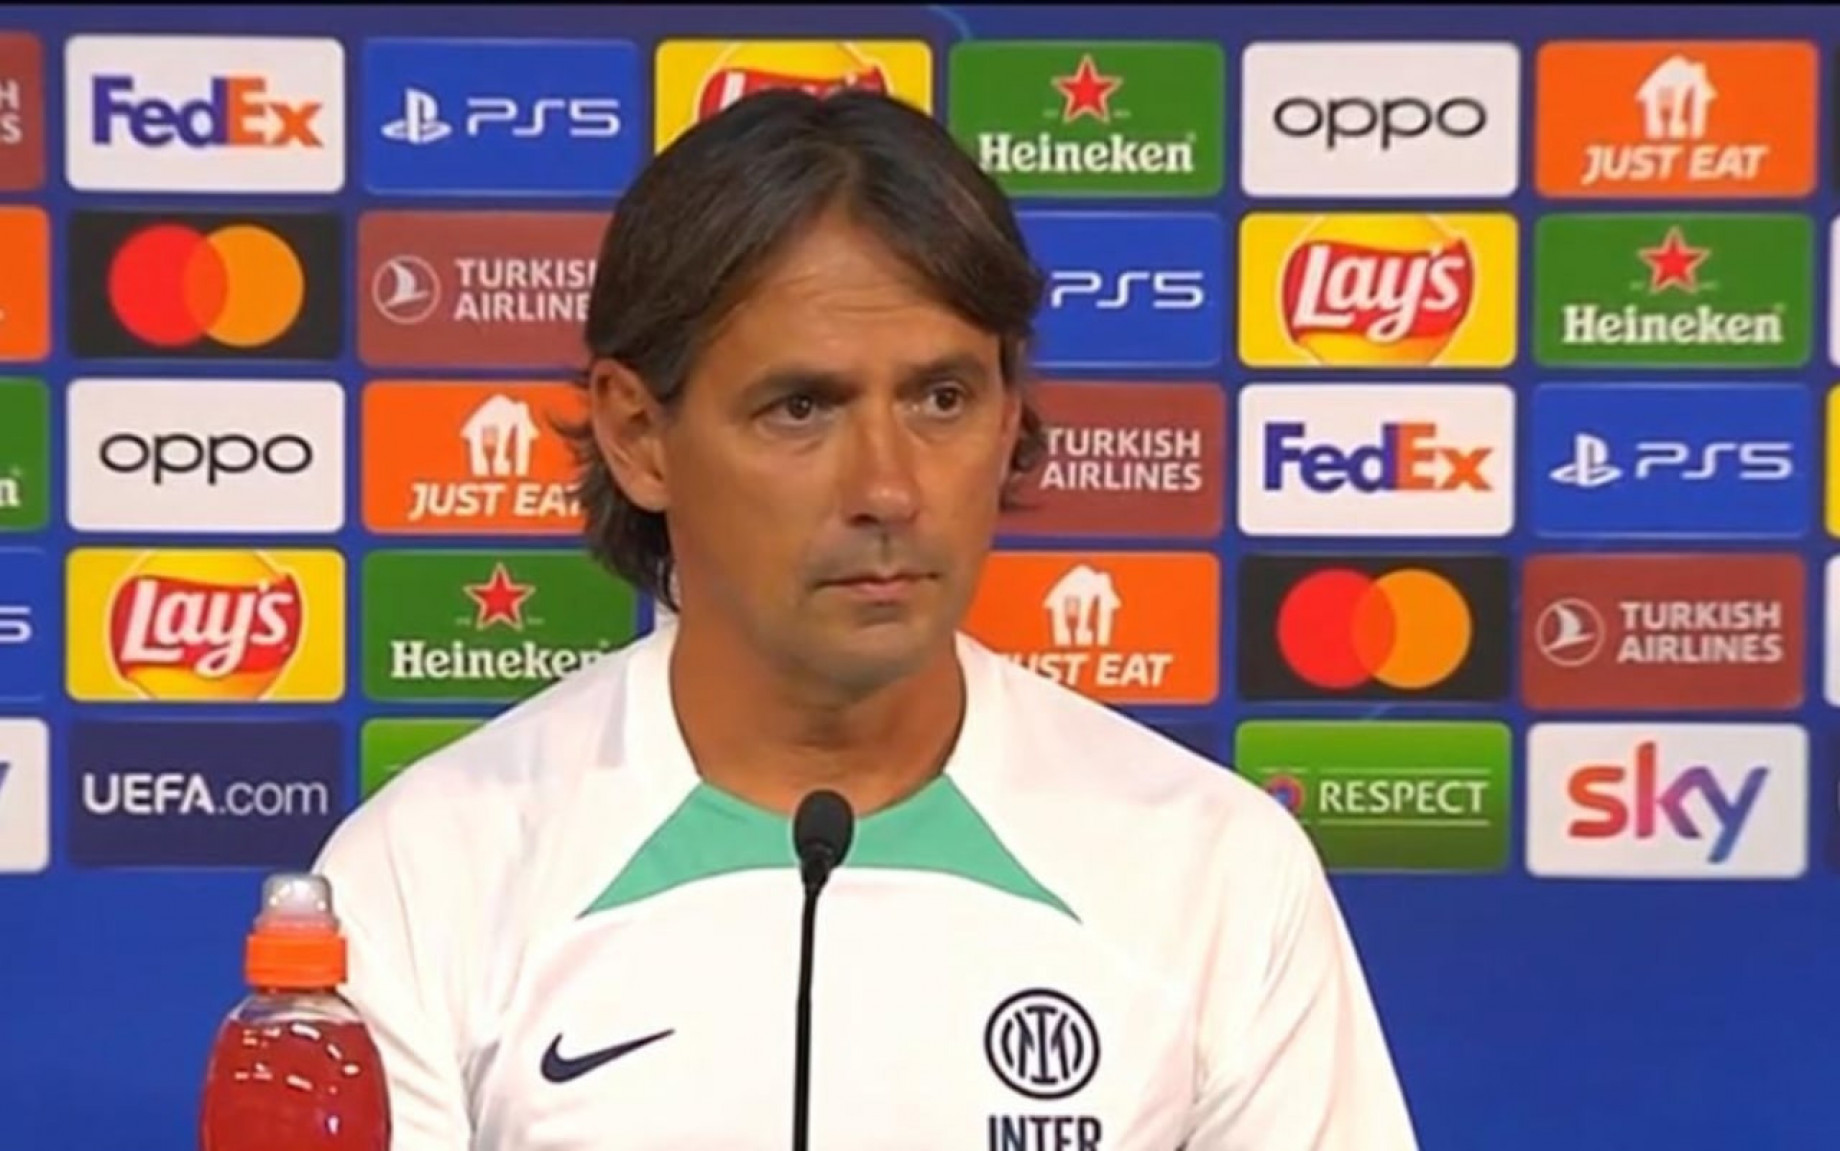 inzaghi-inter-screen-gpo-conferenza-ucl.jpg